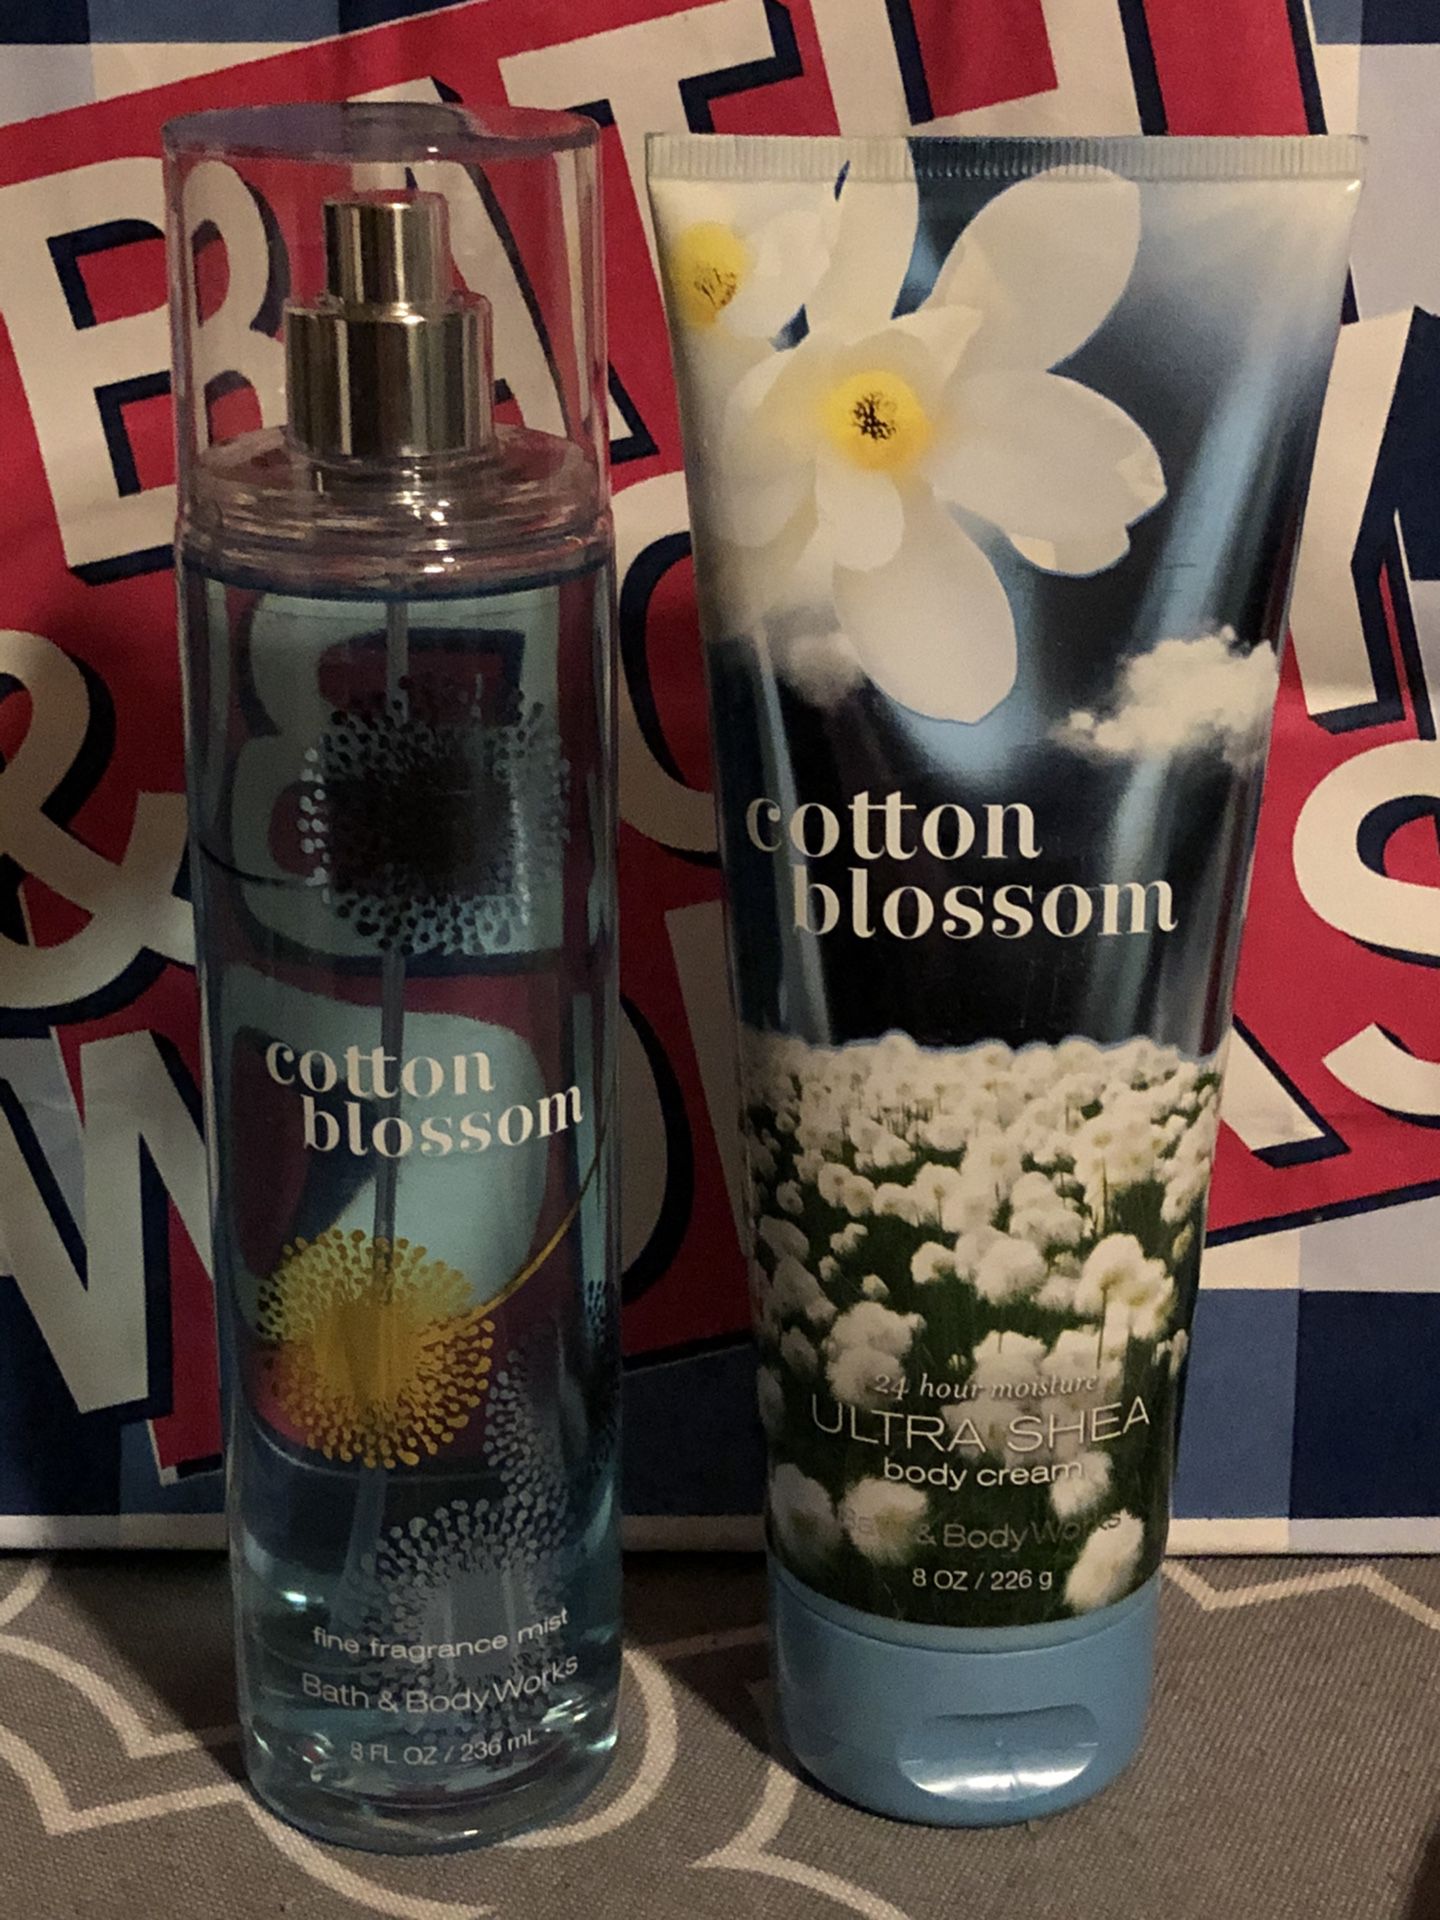 Cotton Blossom Fine Fragrance Mist and Ultra Shea Body Cream. Sold Online Only. Sold As A Set. $9.50 By Bath And Body Works. See Description